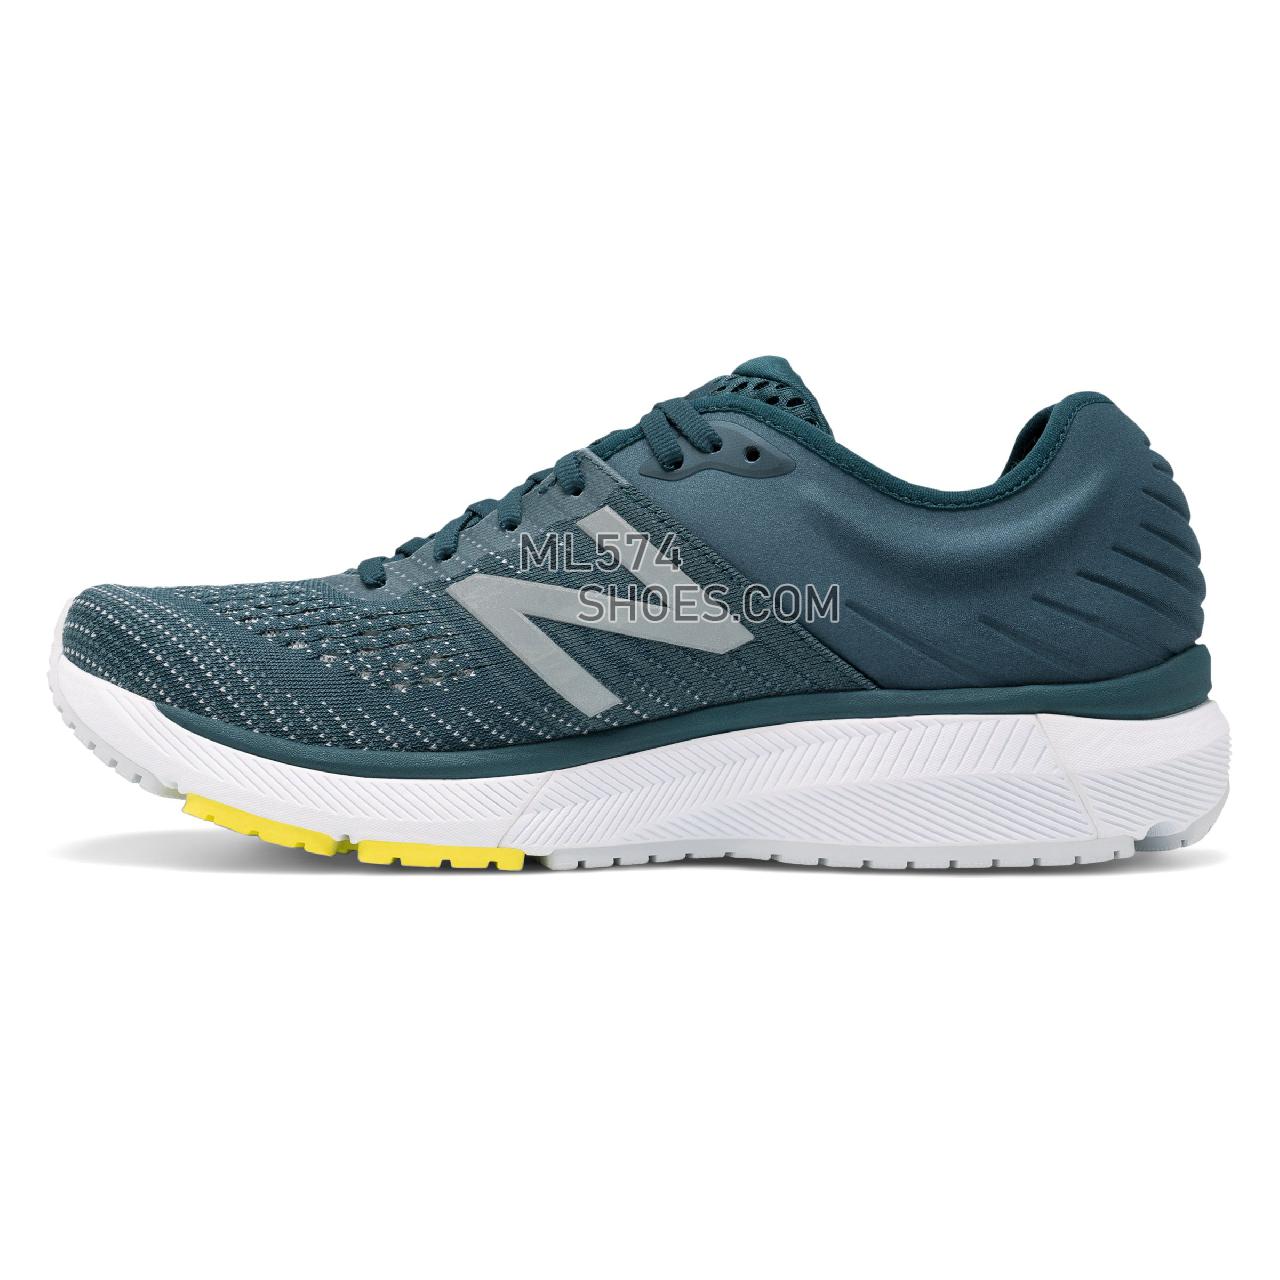 New Balance 860v10 - Men's Stability Running - Supercell with Orion Blue and Sulphur Yellow - M860A10